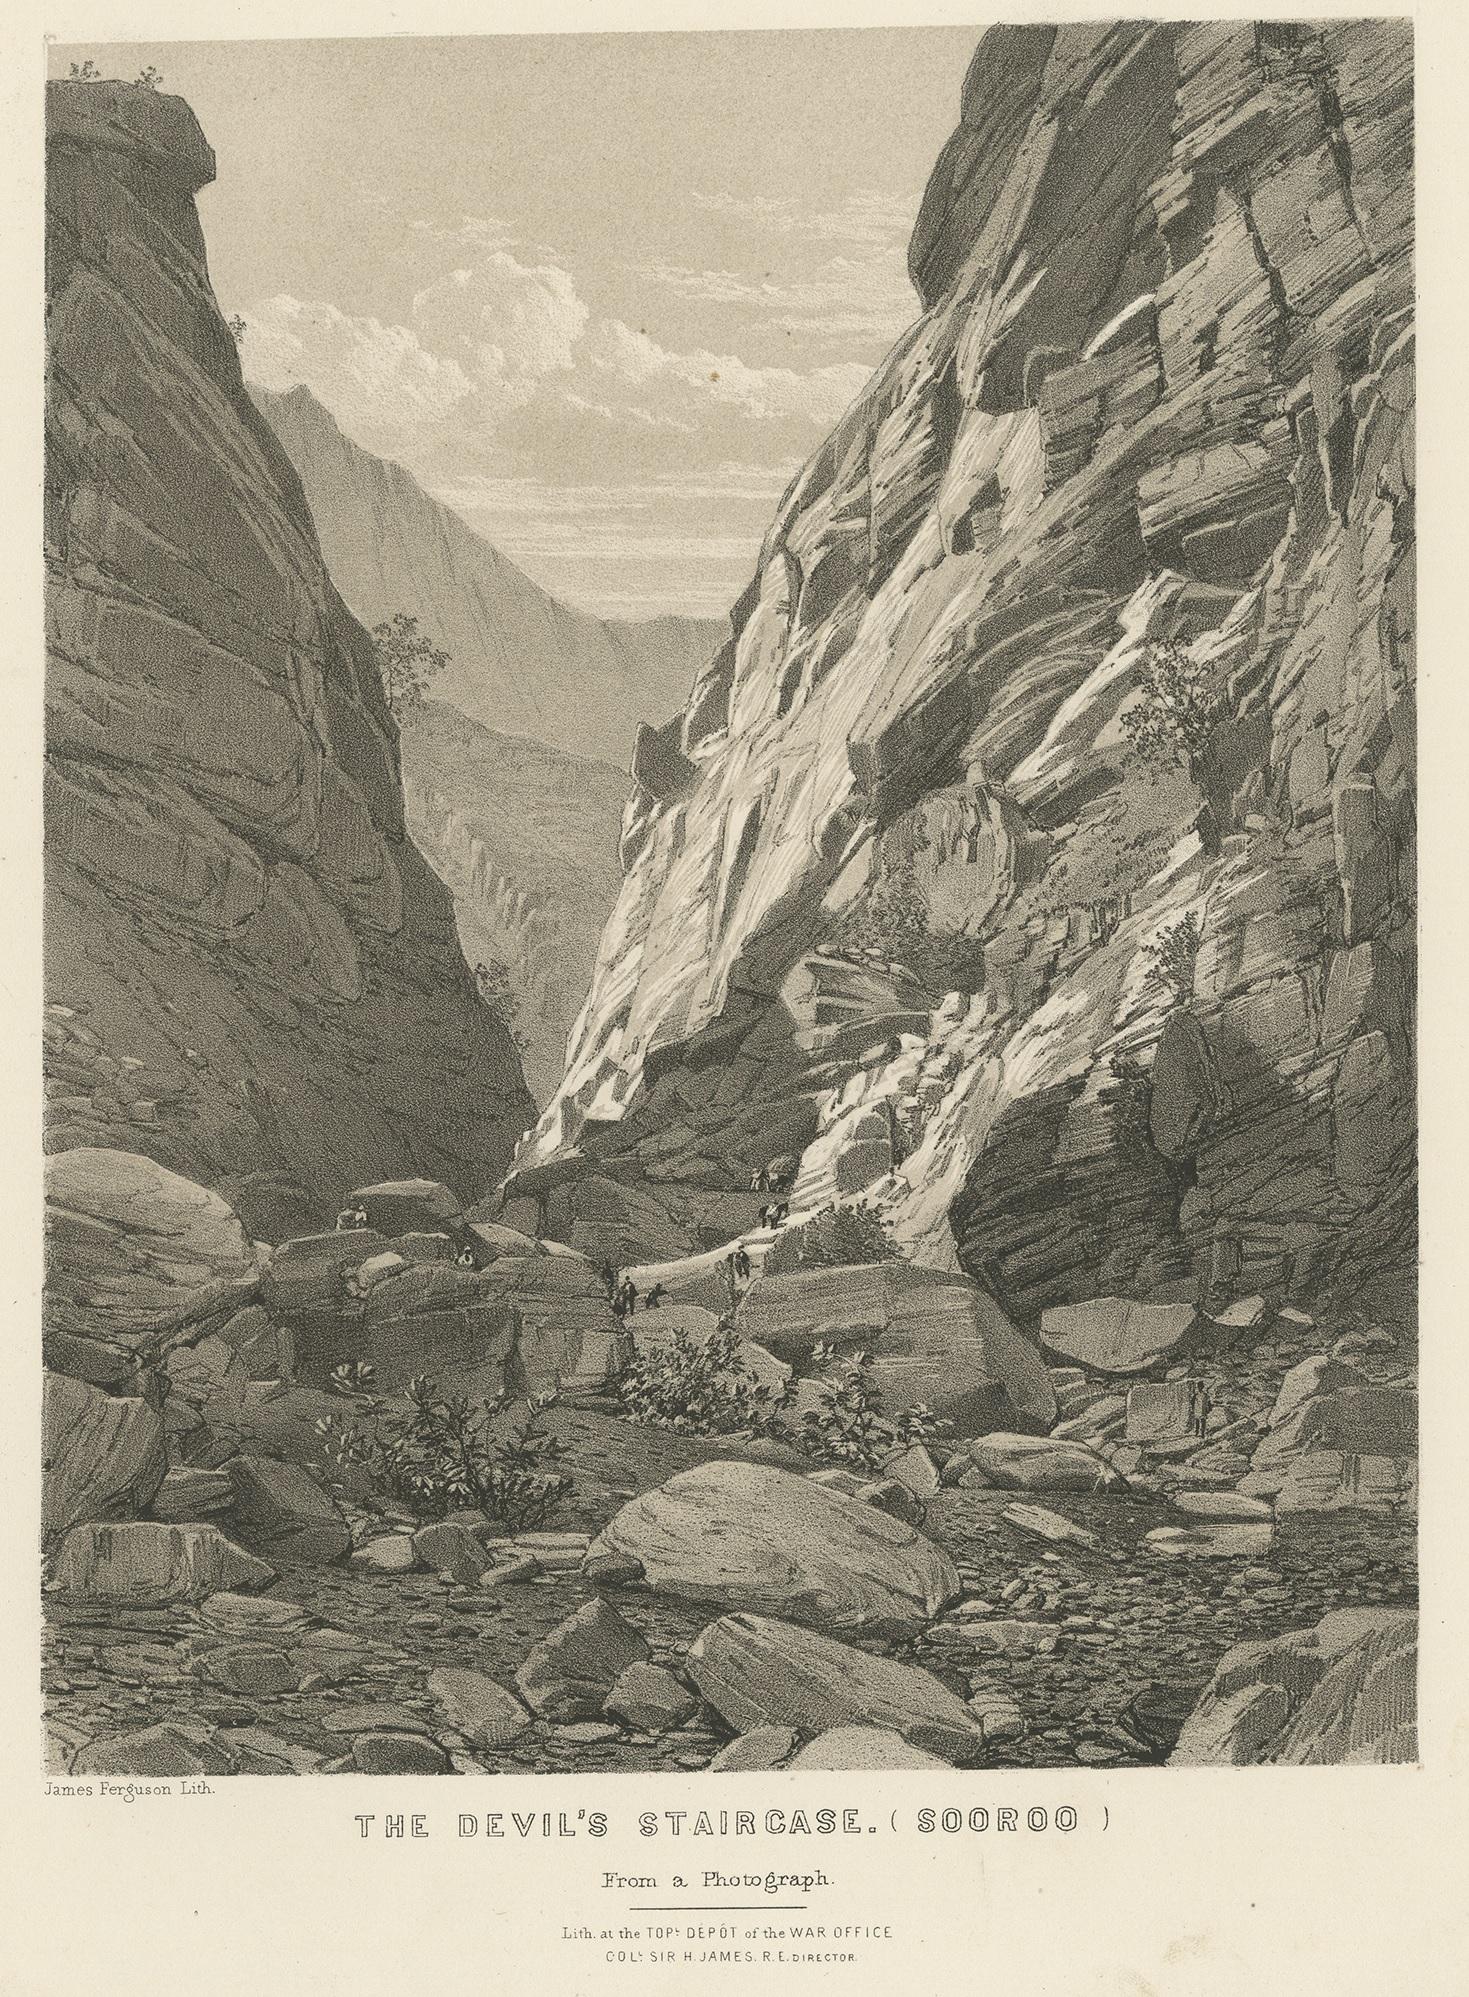 Antique print titled 'The Devil's Staircase'. Lithograph of the Sooroo Pass, Abyssinia. This print originates from 'Record of the Expedition to Abyssinia compiled by order of the Secretary of State for War' by Major Trevenen J. Holland ; & Captain